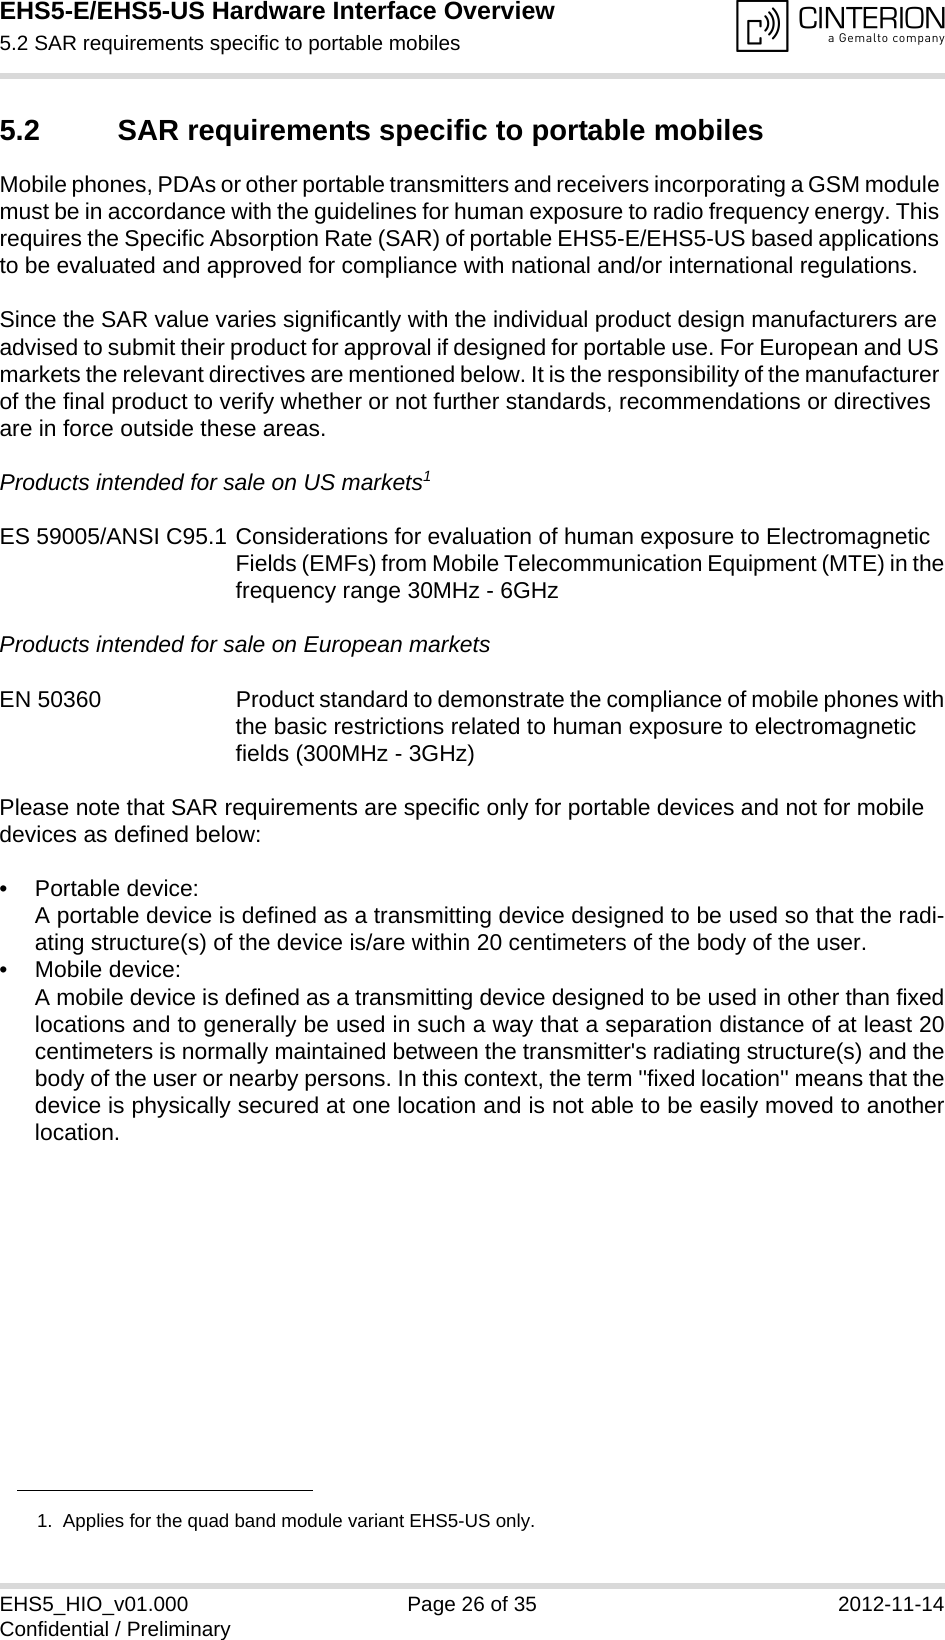 EHS5-E/EHS5-US Hardware Interface Overview5.2 SAR requirements specific to portable mobiles28EHS5_HIO_v01.000 Page 26 of 35 2012-11-14Confidential / Preliminary5.2 SAR requirements specific to portable mobilesMobile phones, PDAs or other portable transmitters and receivers incorporating a GSM module must be in accordance with the guidelines for human exposure to radio frequency energy. This requires the Specific Absorption Rate (SAR) of portable EHS5-E/EHS5-US based applications to be evaluated and approved for compliance with national and/or international regulations. Since the SAR value varies significantly with the individual product design manufacturers are advised to submit their product for approval if designed for portable use. For European and US markets the relevant directives are mentioned below. It is the responsibility of the manufacturer of the final product to verify whether or not further standards, recommendations or directives are in force outside these areas. Products intended for sale on US markets1ES 59005/ANSI C95.1 Considerations for evaluation of human exposure to Electromagnetic Fields (EMFs) from Mobile Telecommunication Equipment (MTE) in thefrequency range 30MHz - 6GHz Products intended for sale on European marketsEN 50360 Product standard to demonstrate the compliance of mobile phones withthe basic restrictions related to human exposure to electromagnetic fields (300MHz - 3GHz)Please note that SAR requirements are specific only for portable devices and not for mobile devices as defined below:• Portable device:A portable device is defined as a transmitting device designed to be used so that the radi-ating structure(s) of the device is/are within 20 centimeters of the body of the user.• Mobile device:A mobile device is defined as a transmitting device designed to be used in other than fixedlocations and to generally be used in such a way that a separation distance of at least 20centimeters is normally maintained between the transmitter&apos;s radiating structure(s) and thebody of the user or nearby persons. In this context, the term &apos;&apos;fixed location&apos;&apos; means that thedevice is physically secured at one location and is not able to be easily moved to anotherlocation.1.  Applies for the quad band module variant EHS5-US only.